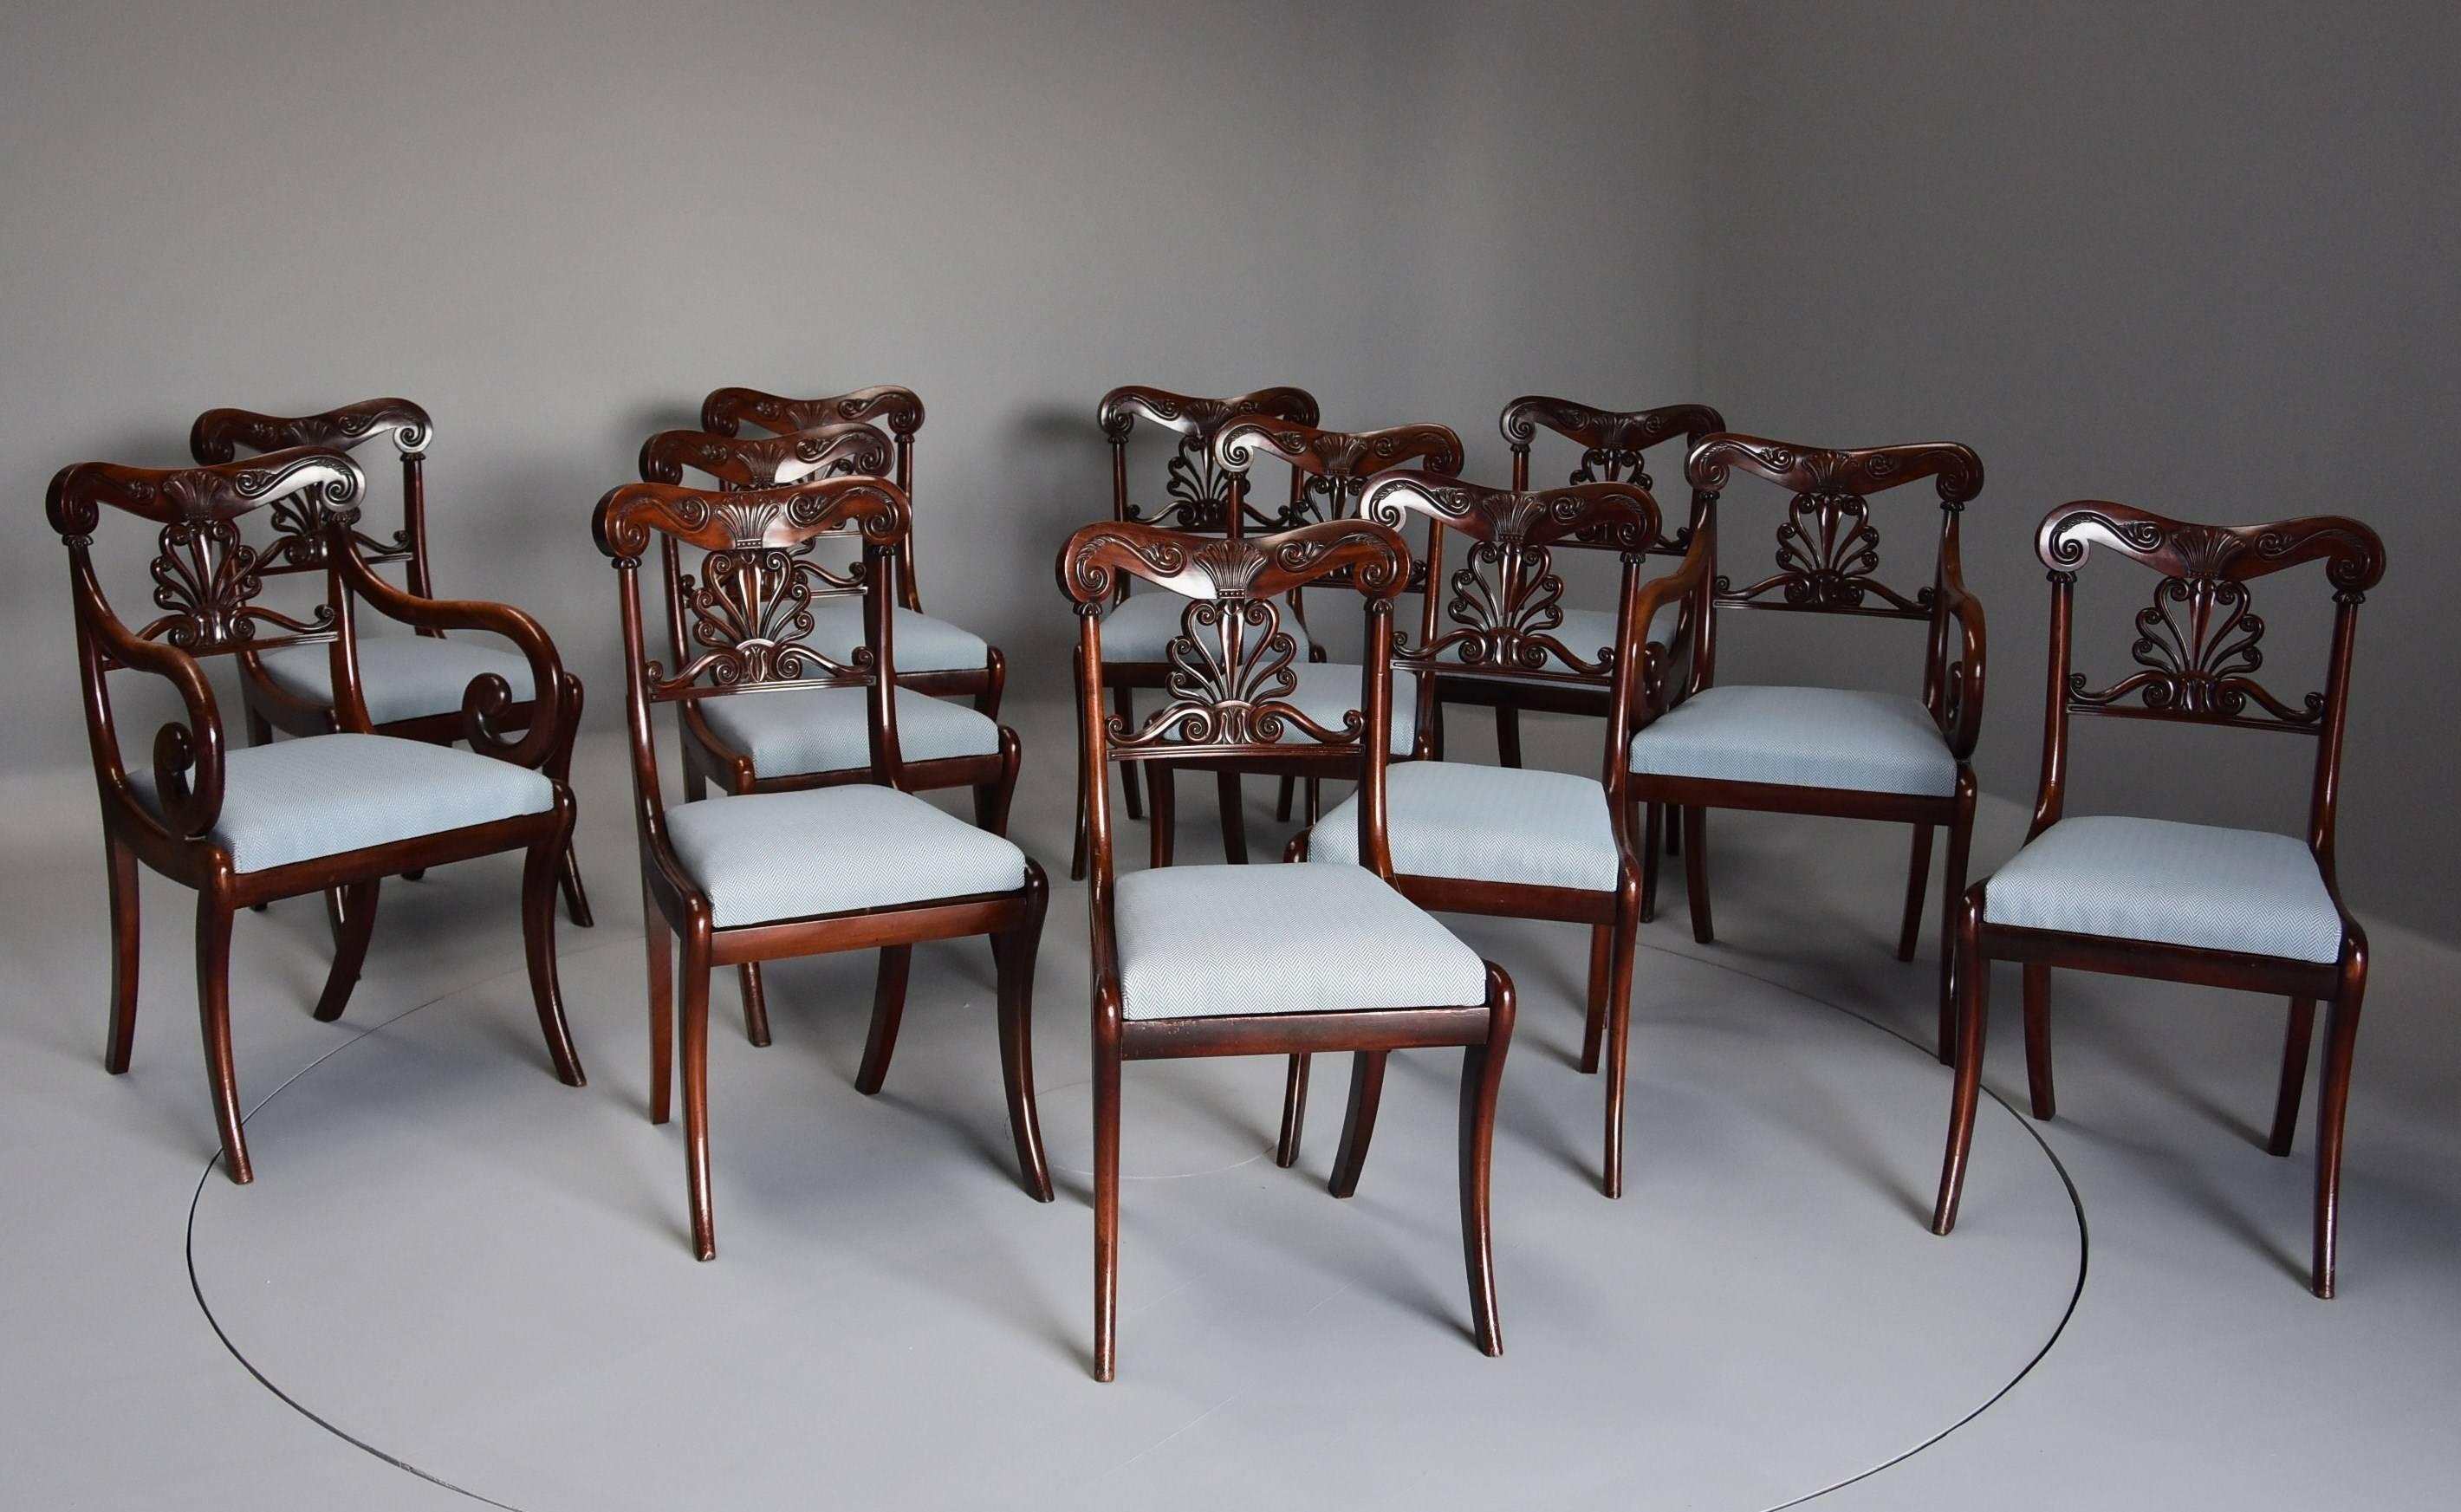 An exceptional set of 12 superb quality Cuban mahogany Regency dining chairs of fine patina and of Gillows quality.

This set of chairs consists of ten single chairs and two armchairs, the shaped top rail being finely carved with stylized scallop